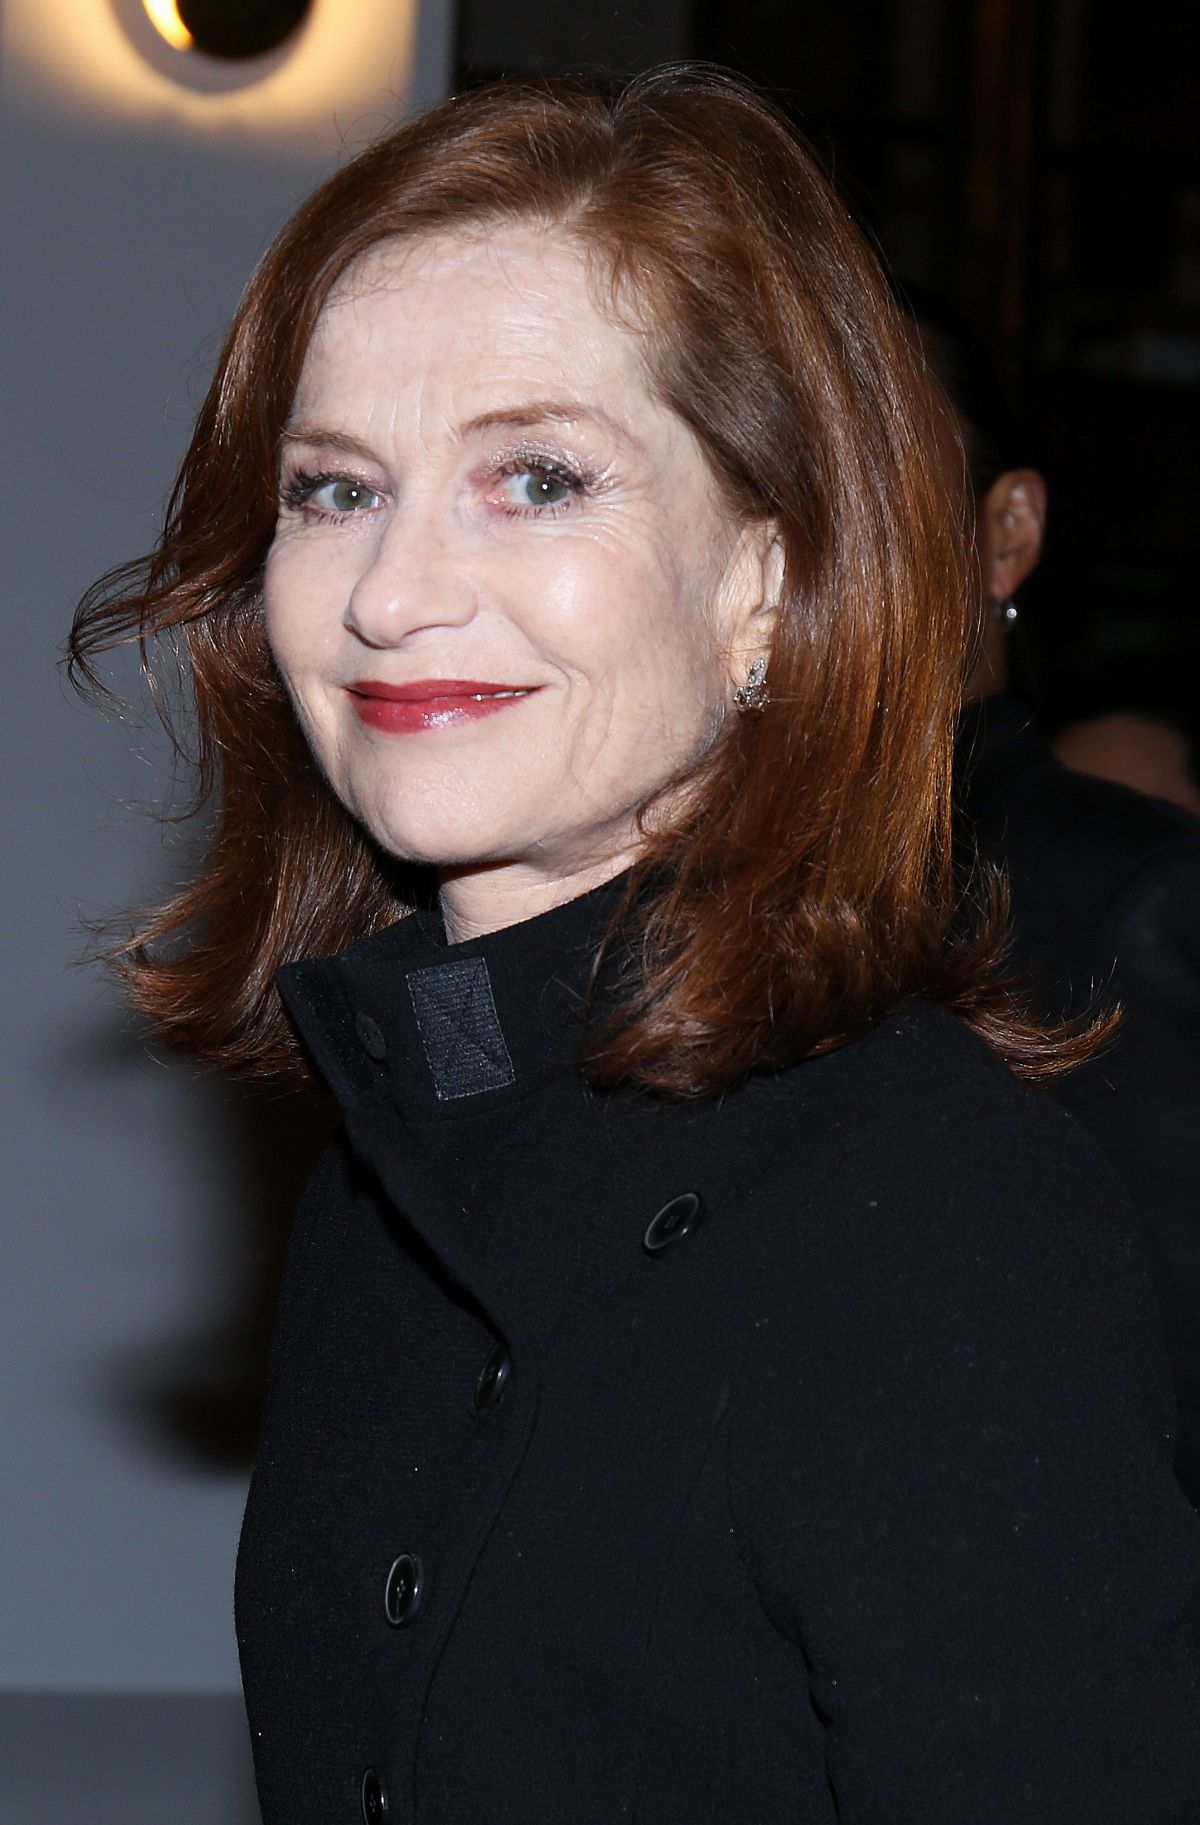 ISABELLE HUPPERT at Westminster Hotel in Paris 01/30/2017 - HawtCelebs